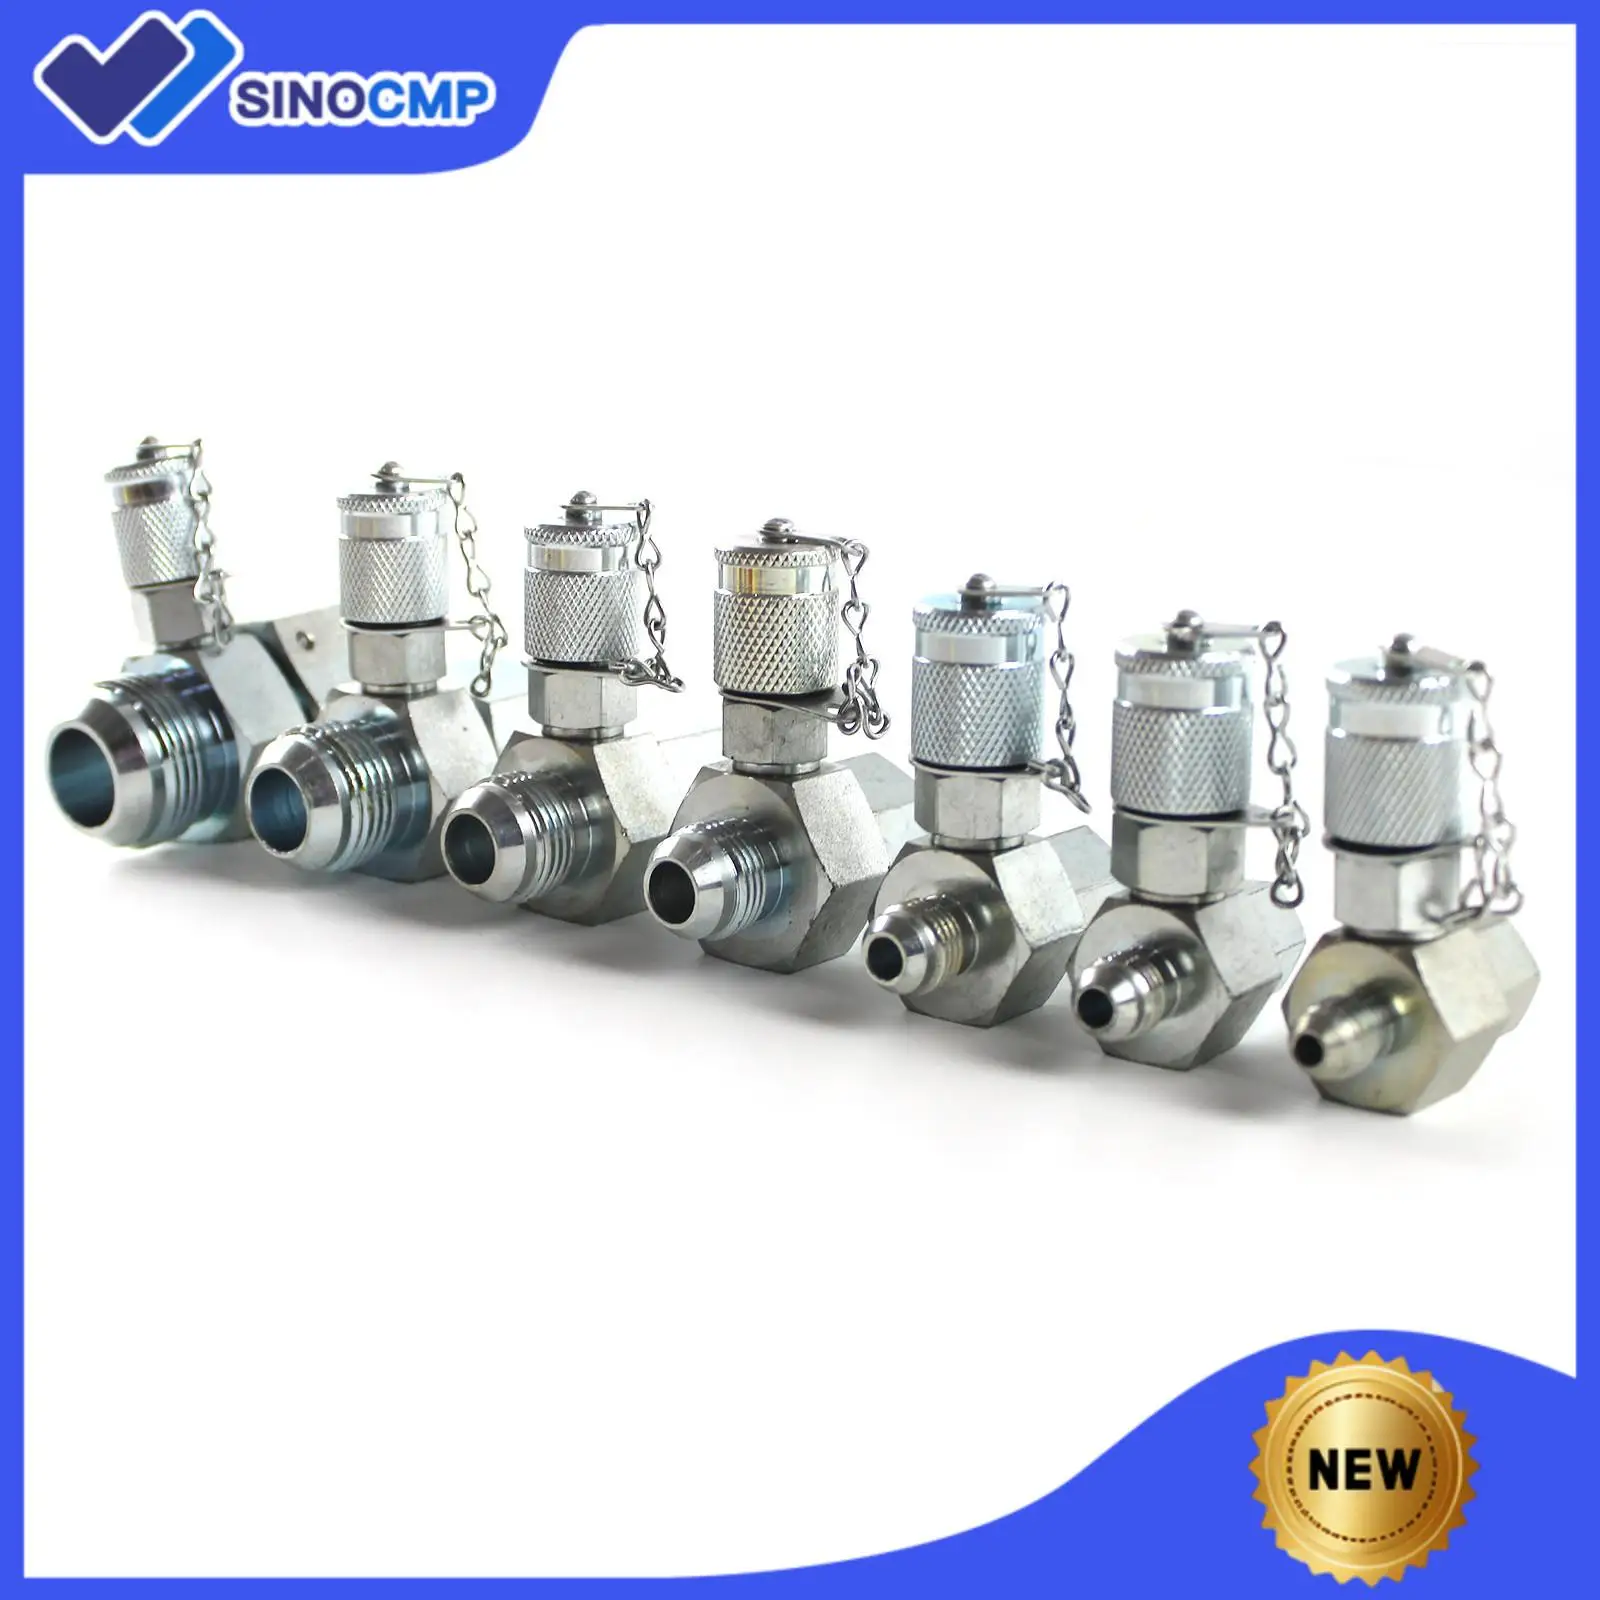 7X JIC-37° Type Hydraulic Swivel Run Tees for Excavator UNF 1-5/16 1-1/16  7/8 3/4  9/16 1/2  7/16 Series Test Coupling Point